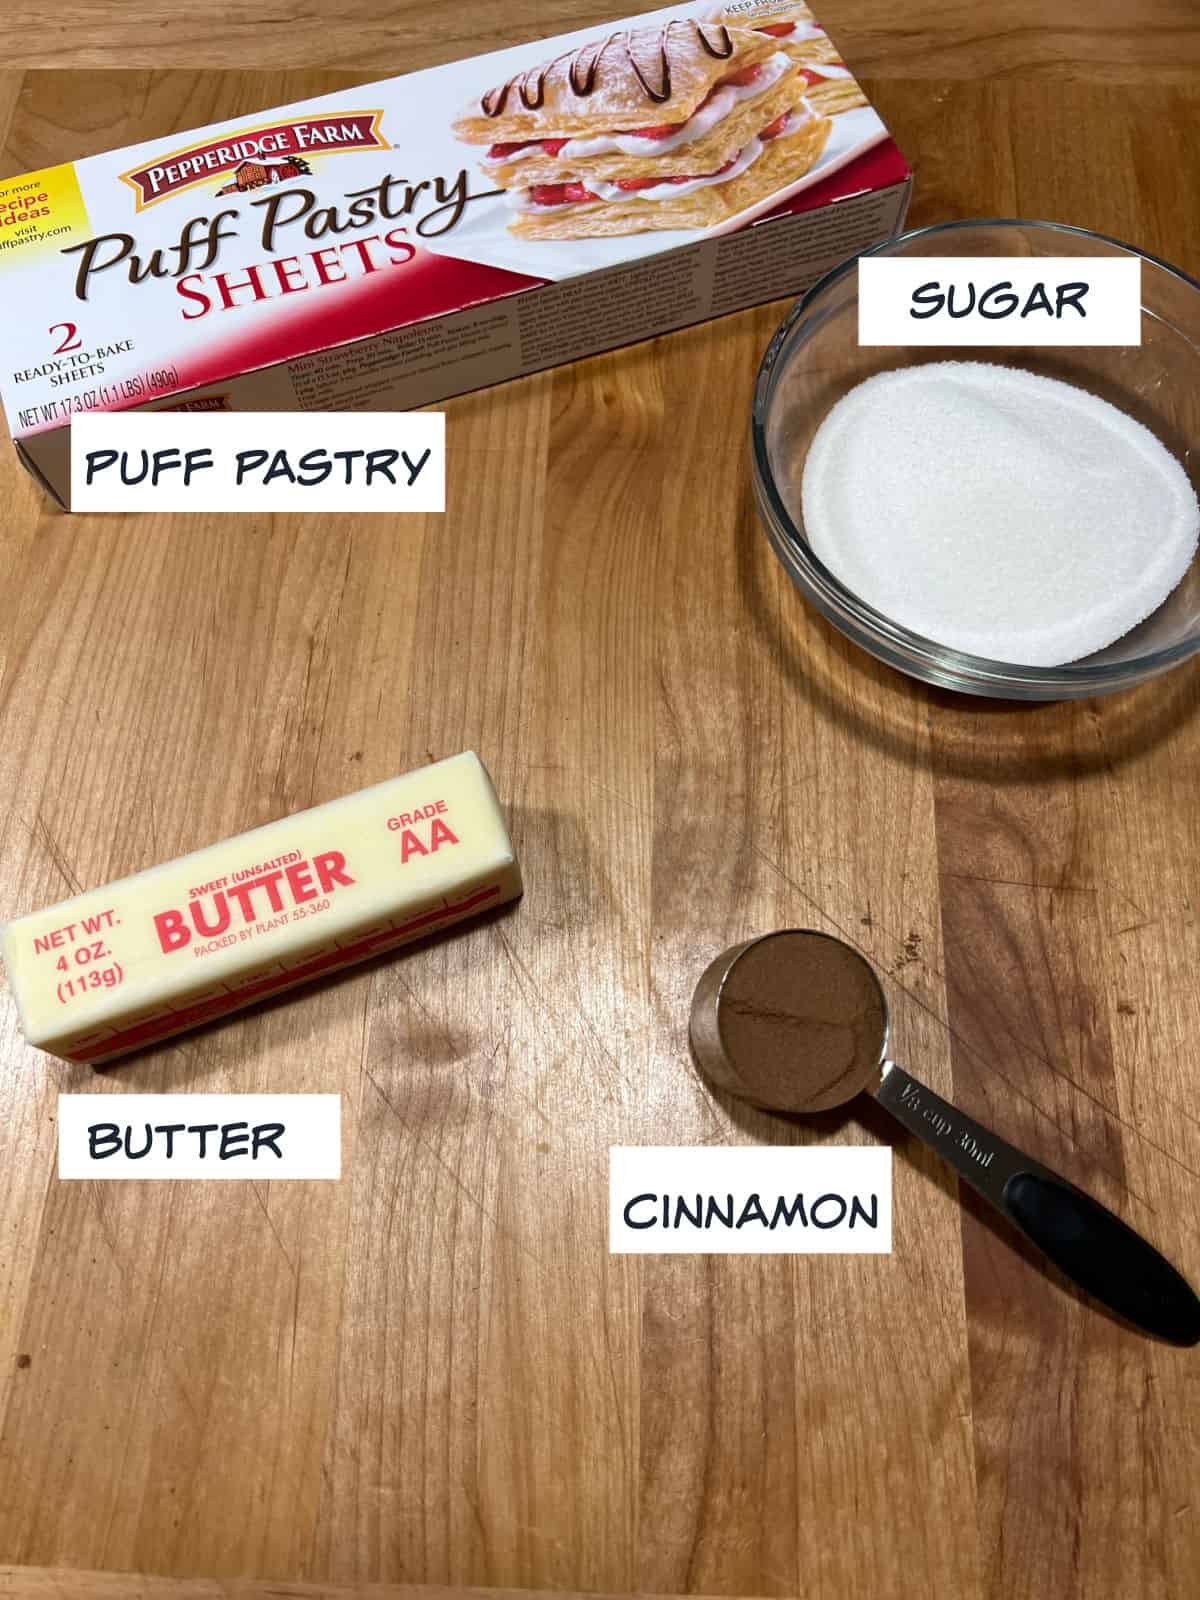 Ingredients: puff pastry, sugar, cinnamon, and butter.